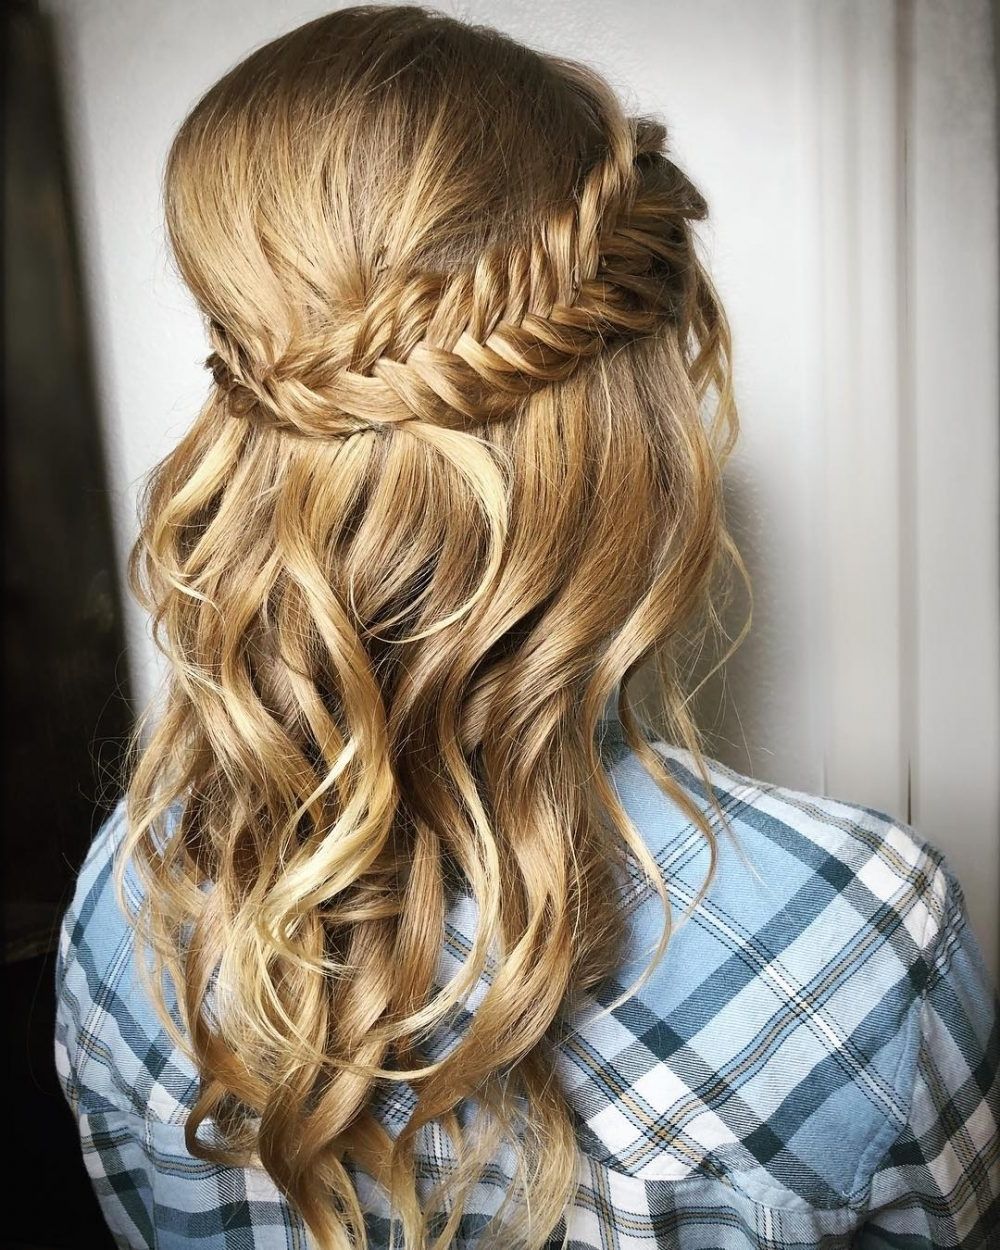 Half Up Half Down Prom Hairstyles – Pictures And How To's Pertaining To Current Braided Along The Way Hairstyles (View 18 of 20)